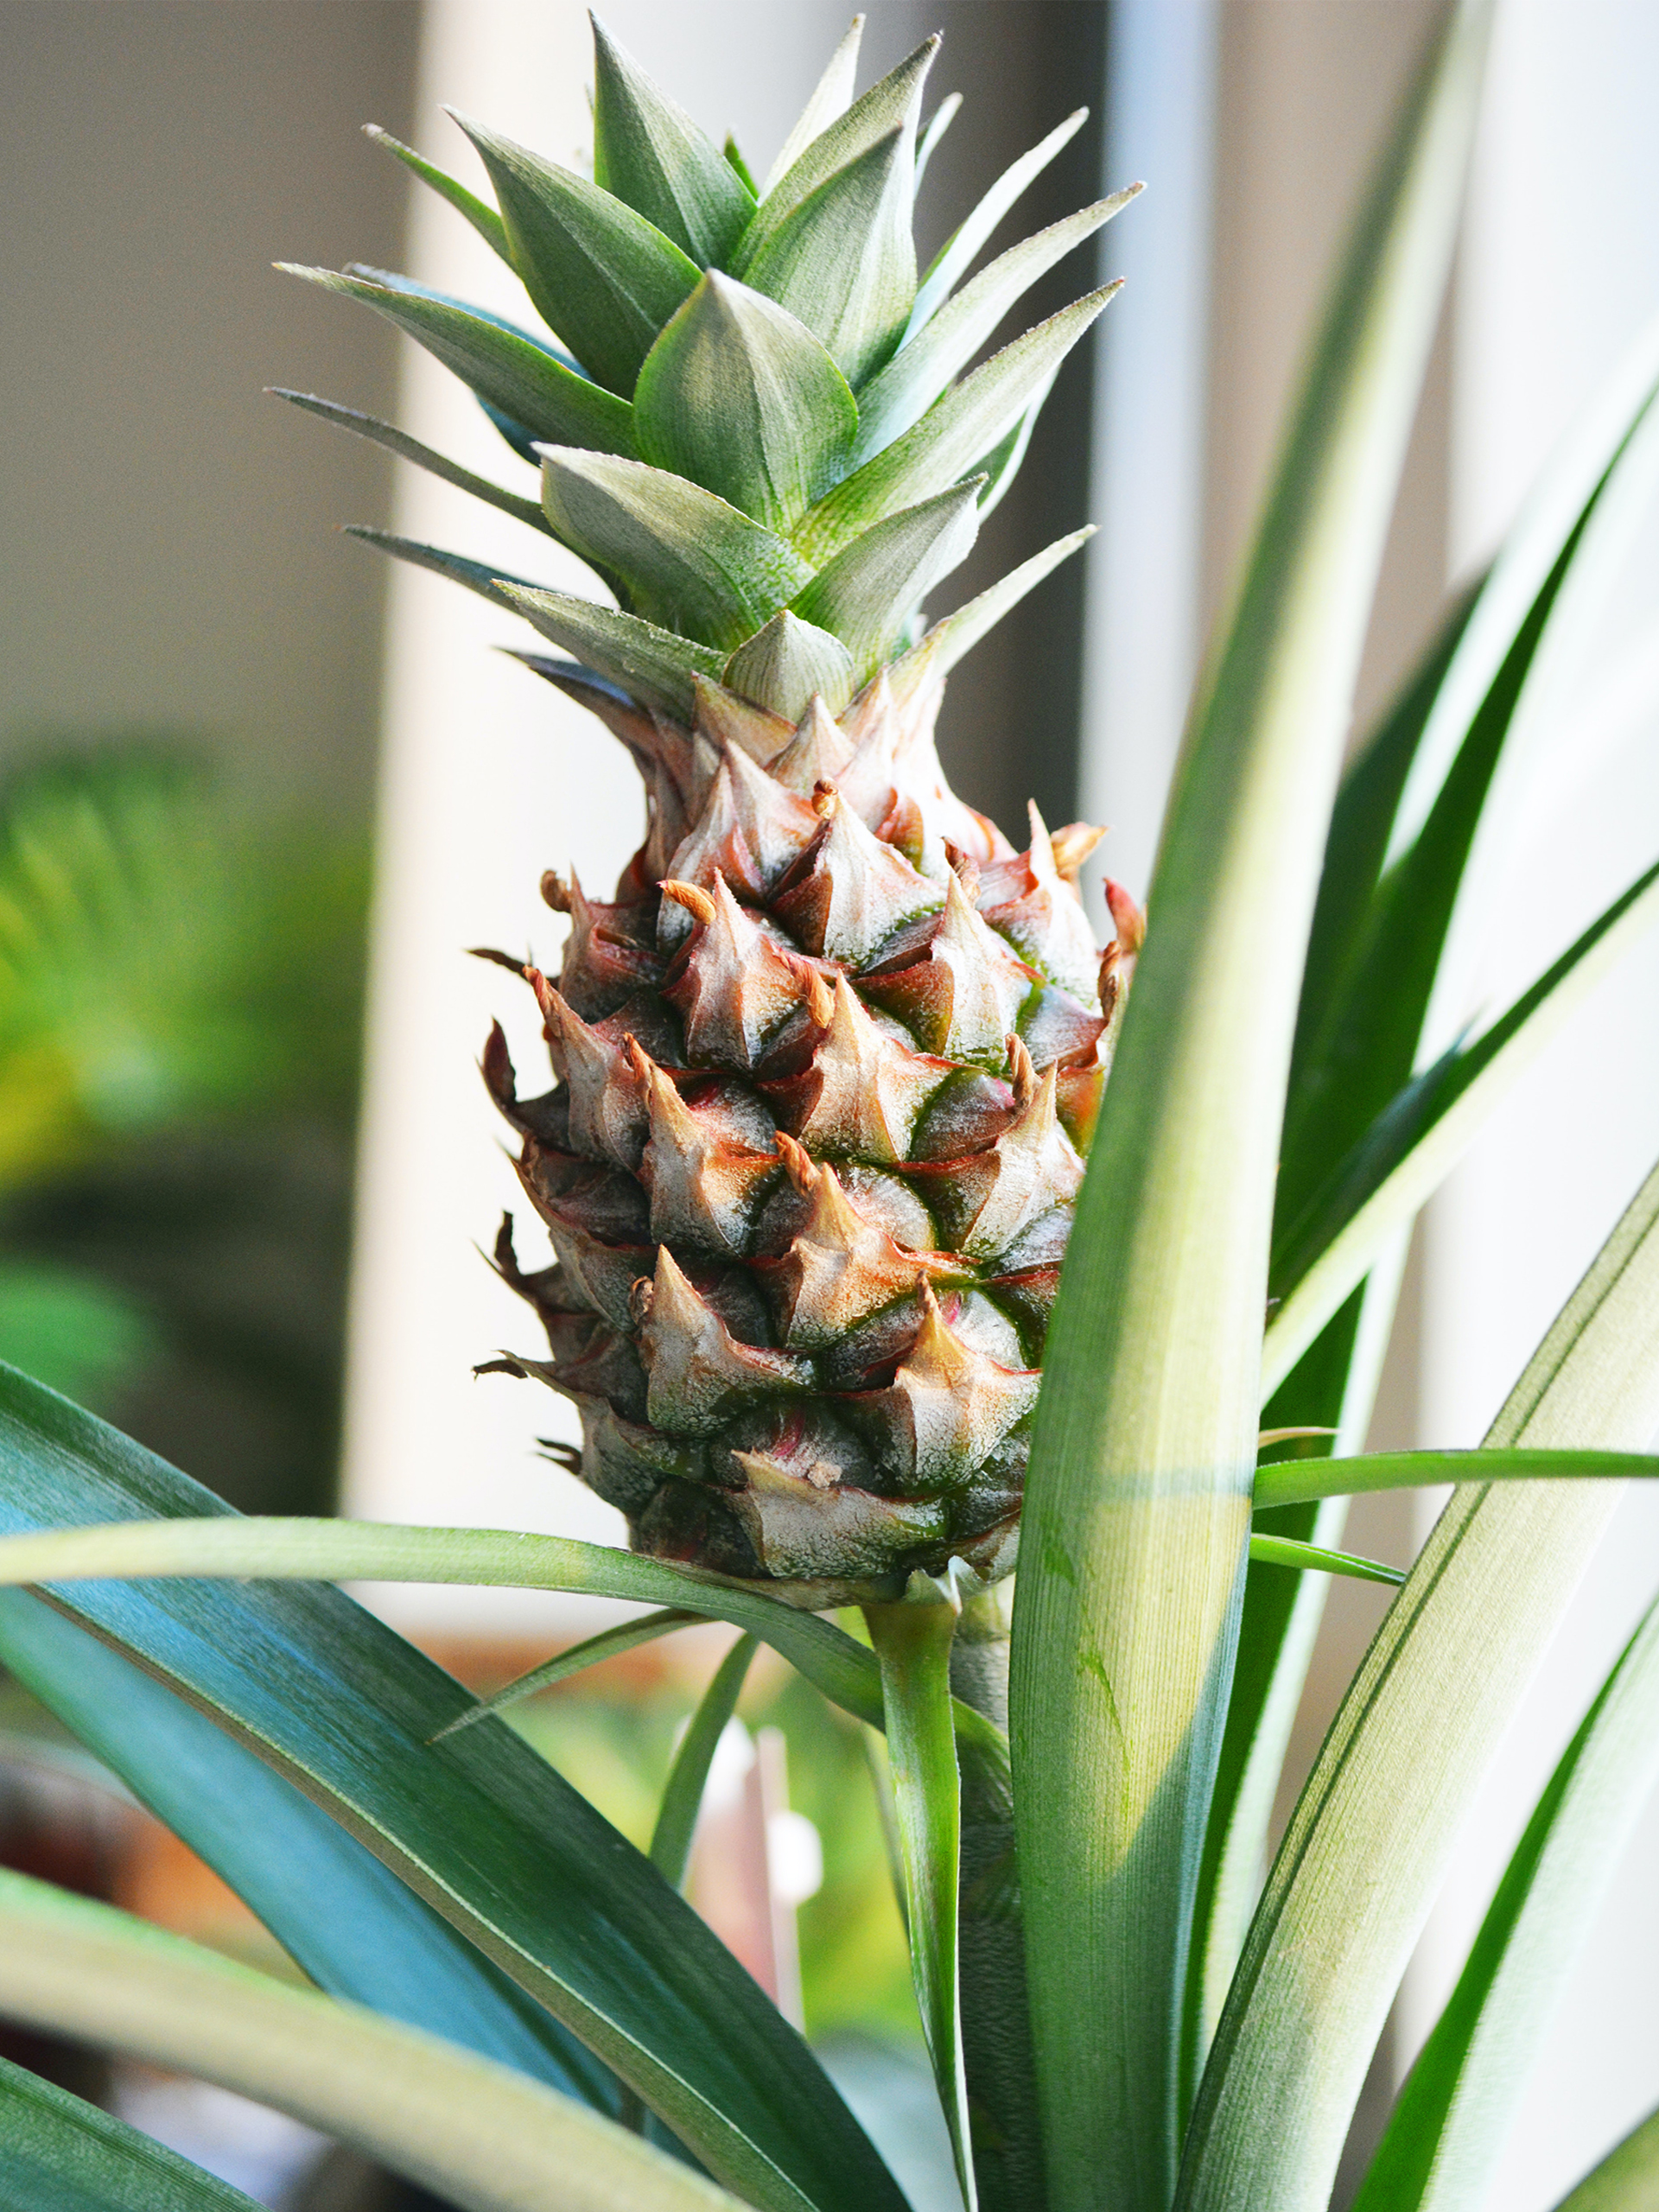 Eat More Pineapples to Enjoy These Benefits